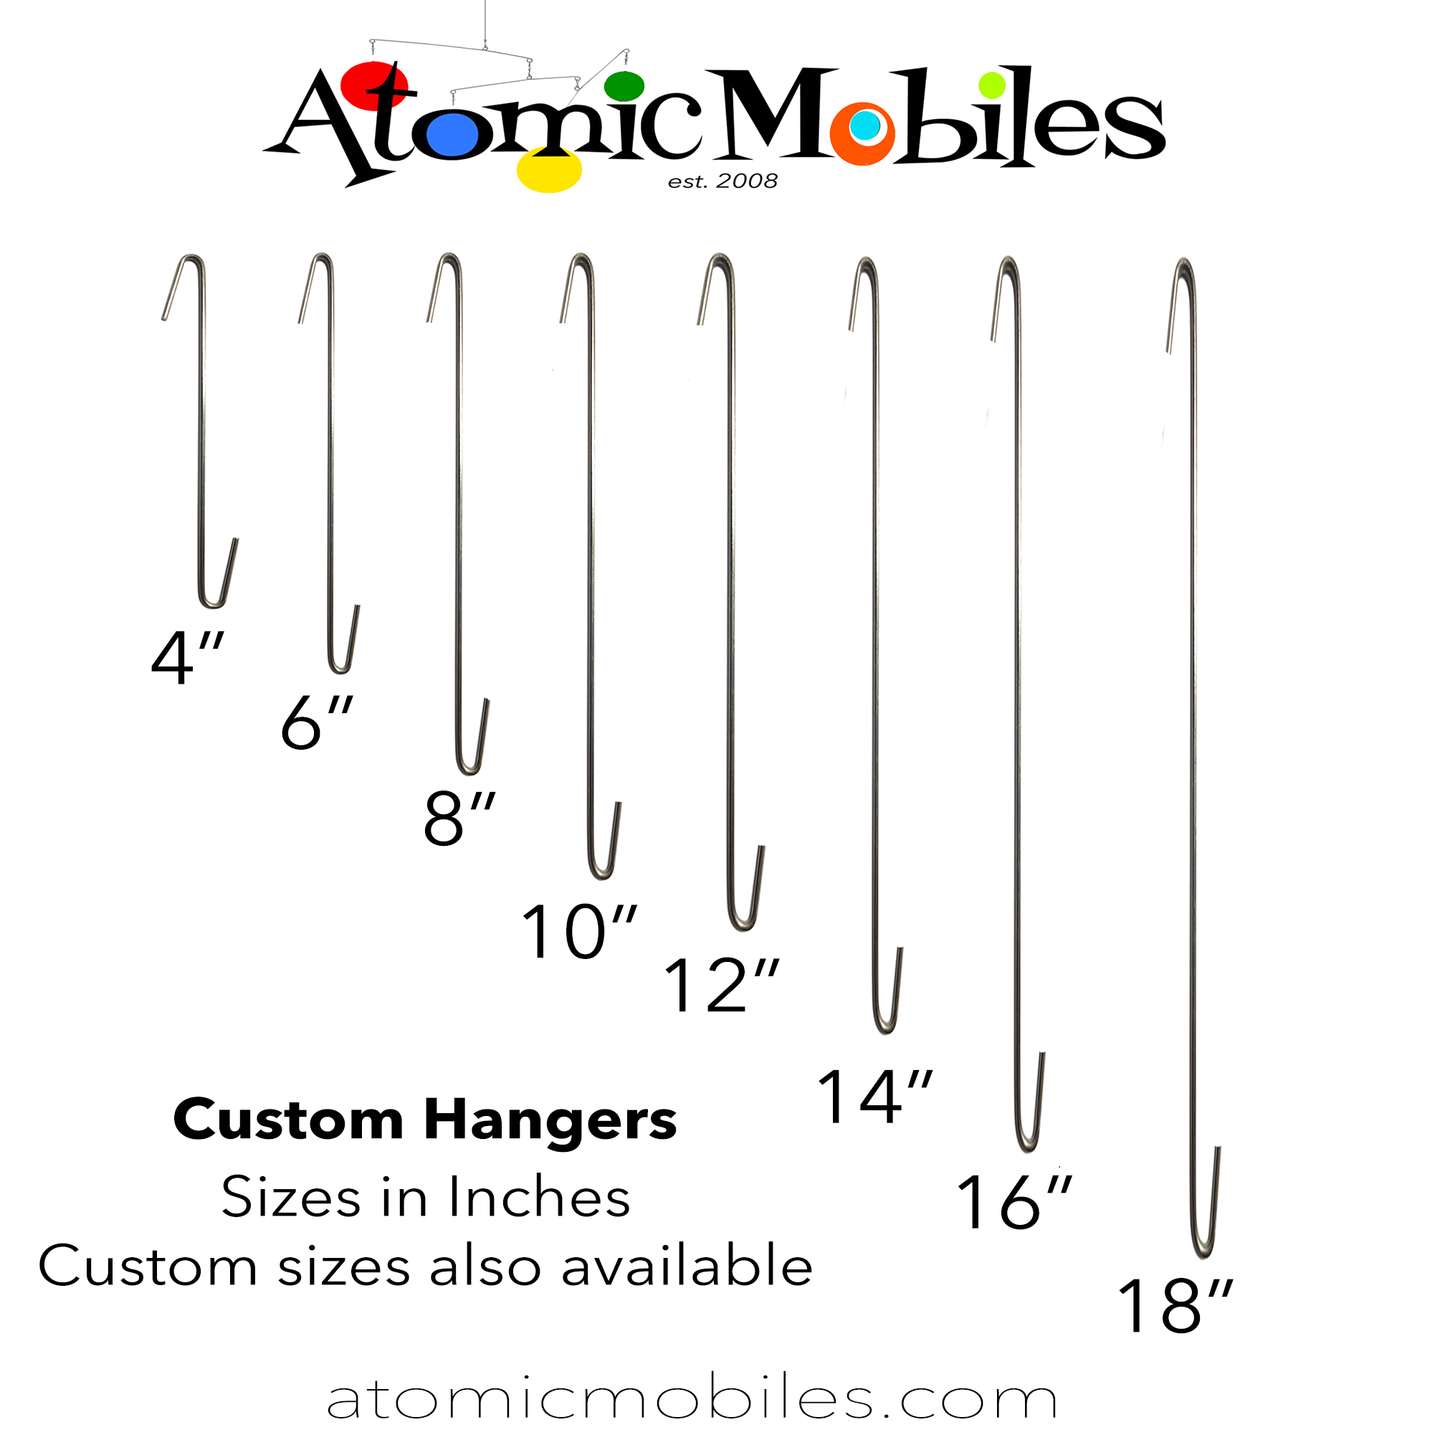 Heavy duty stainless steel custom hanging hooks for Atomic Mobiles and Room Dividers by AtomicMobiles.com